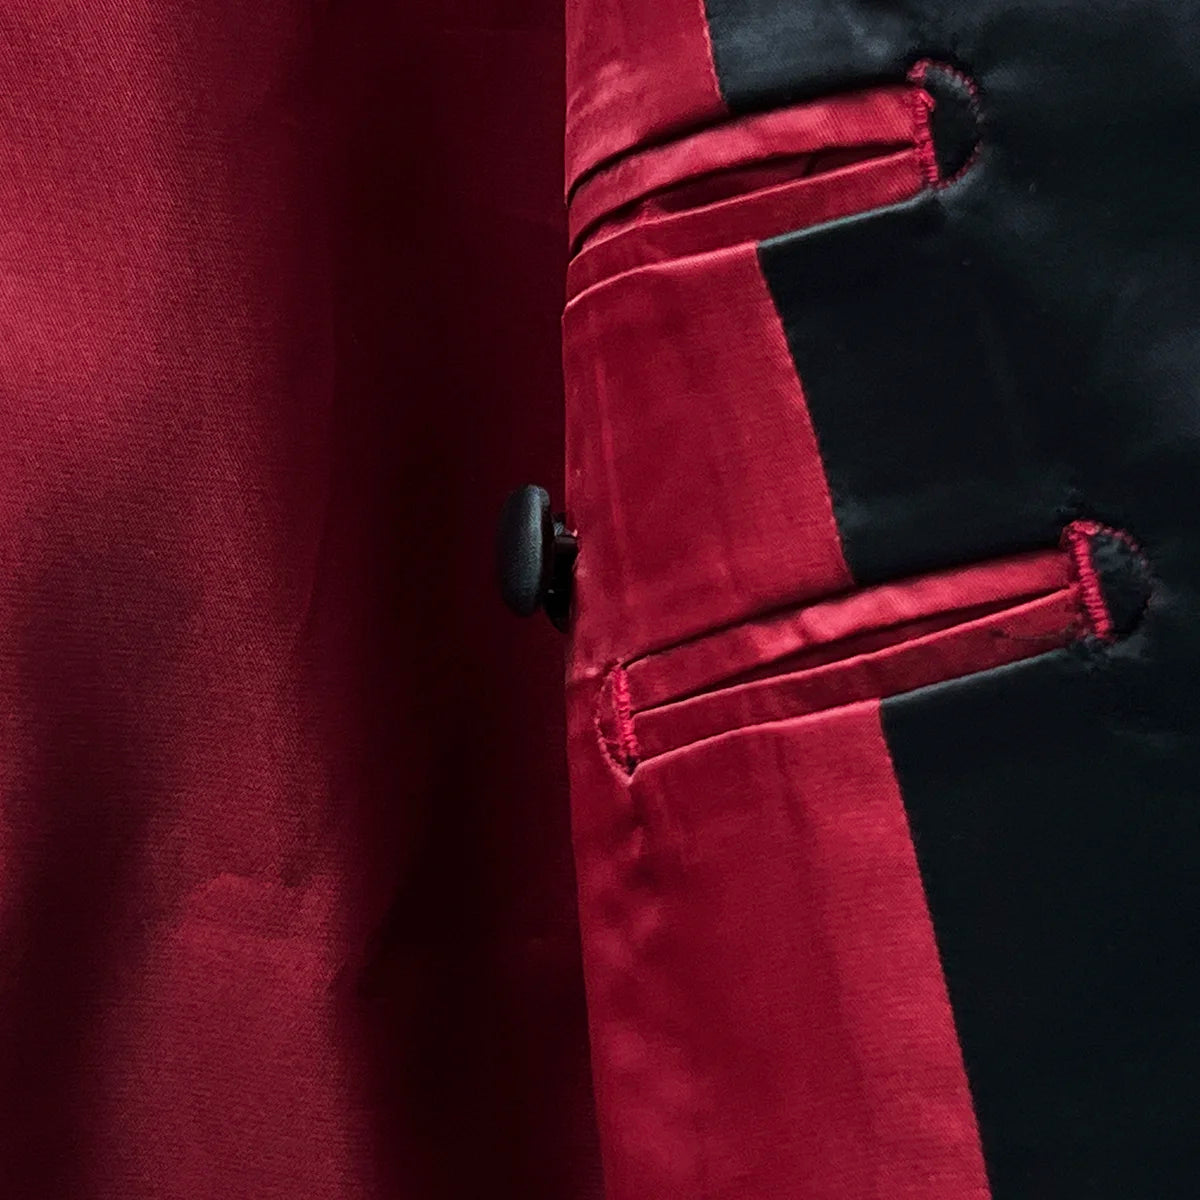 Detailed image of the Bemberg lining, showcasing the rich tomato red color and smooth texture.